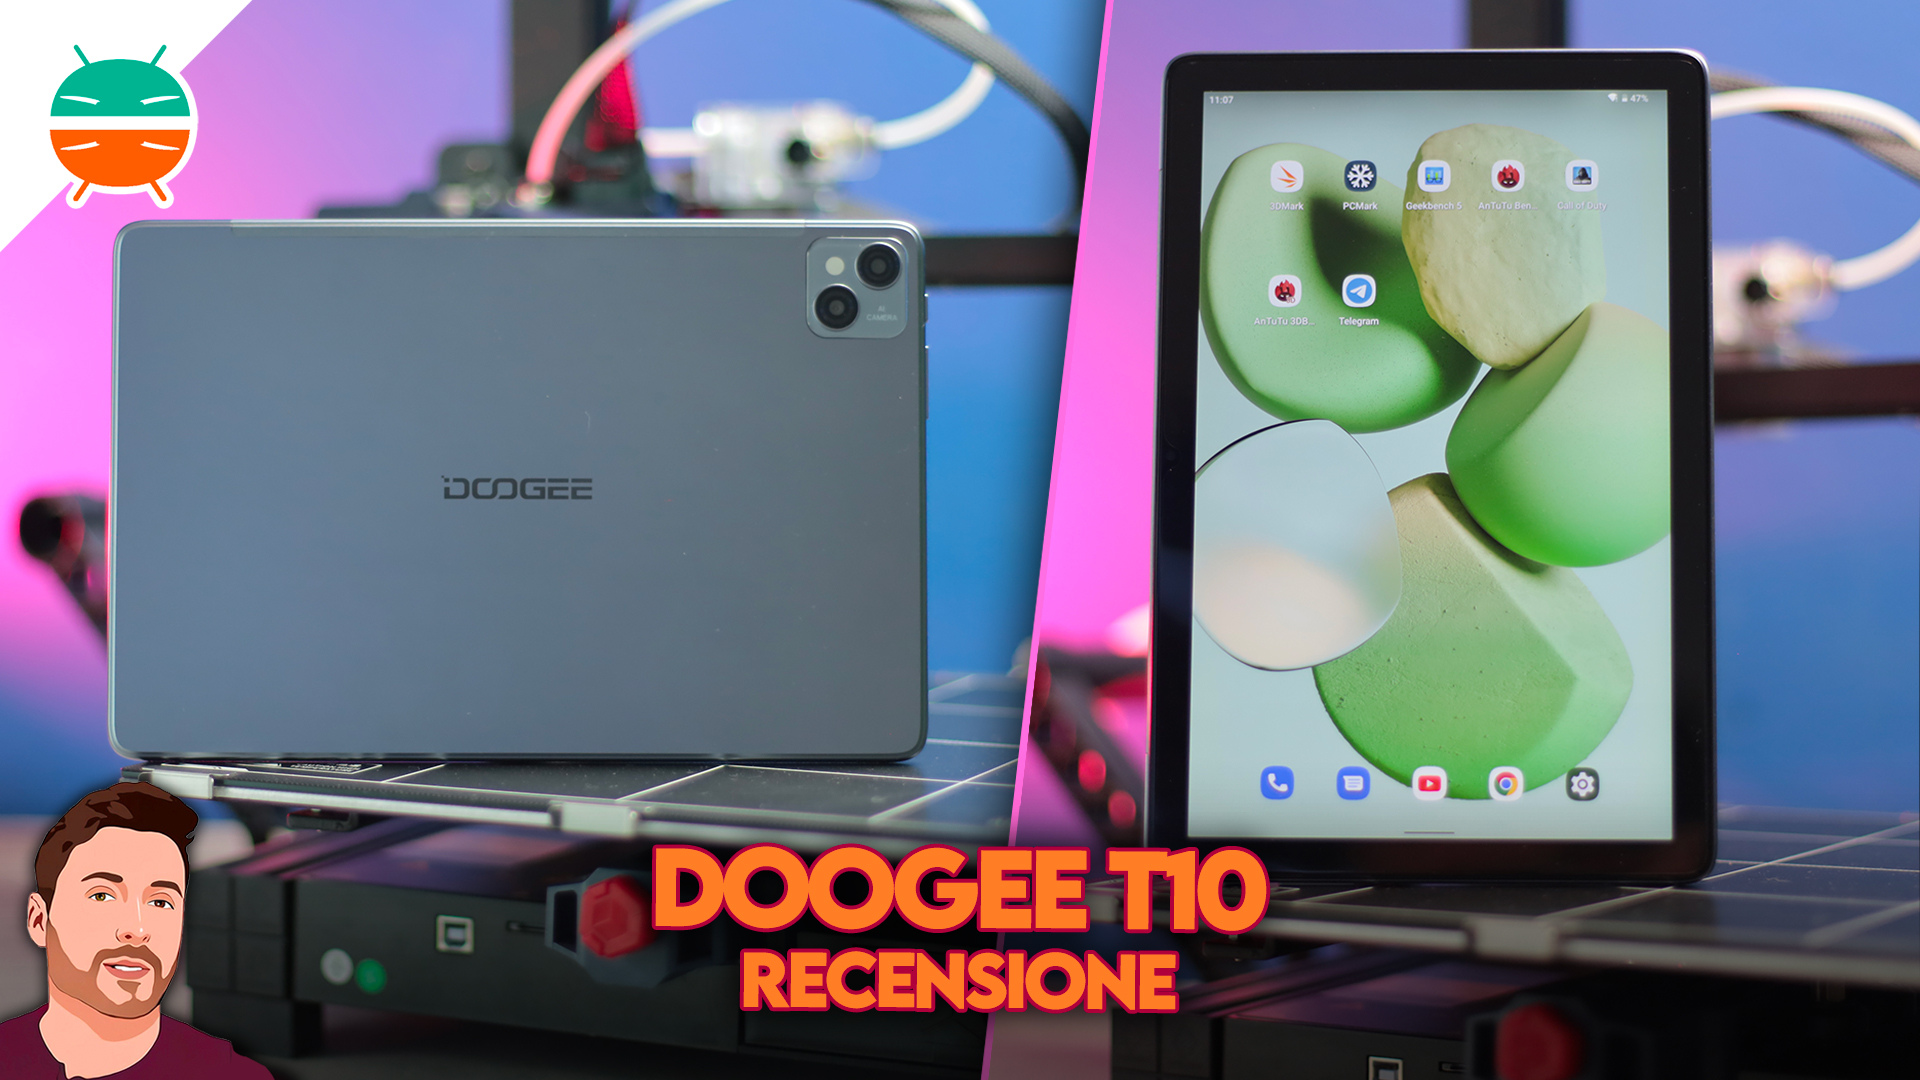 Doogee T10 review: A tablet with 4G LTE support for under $200, what's not  to like - Neowin